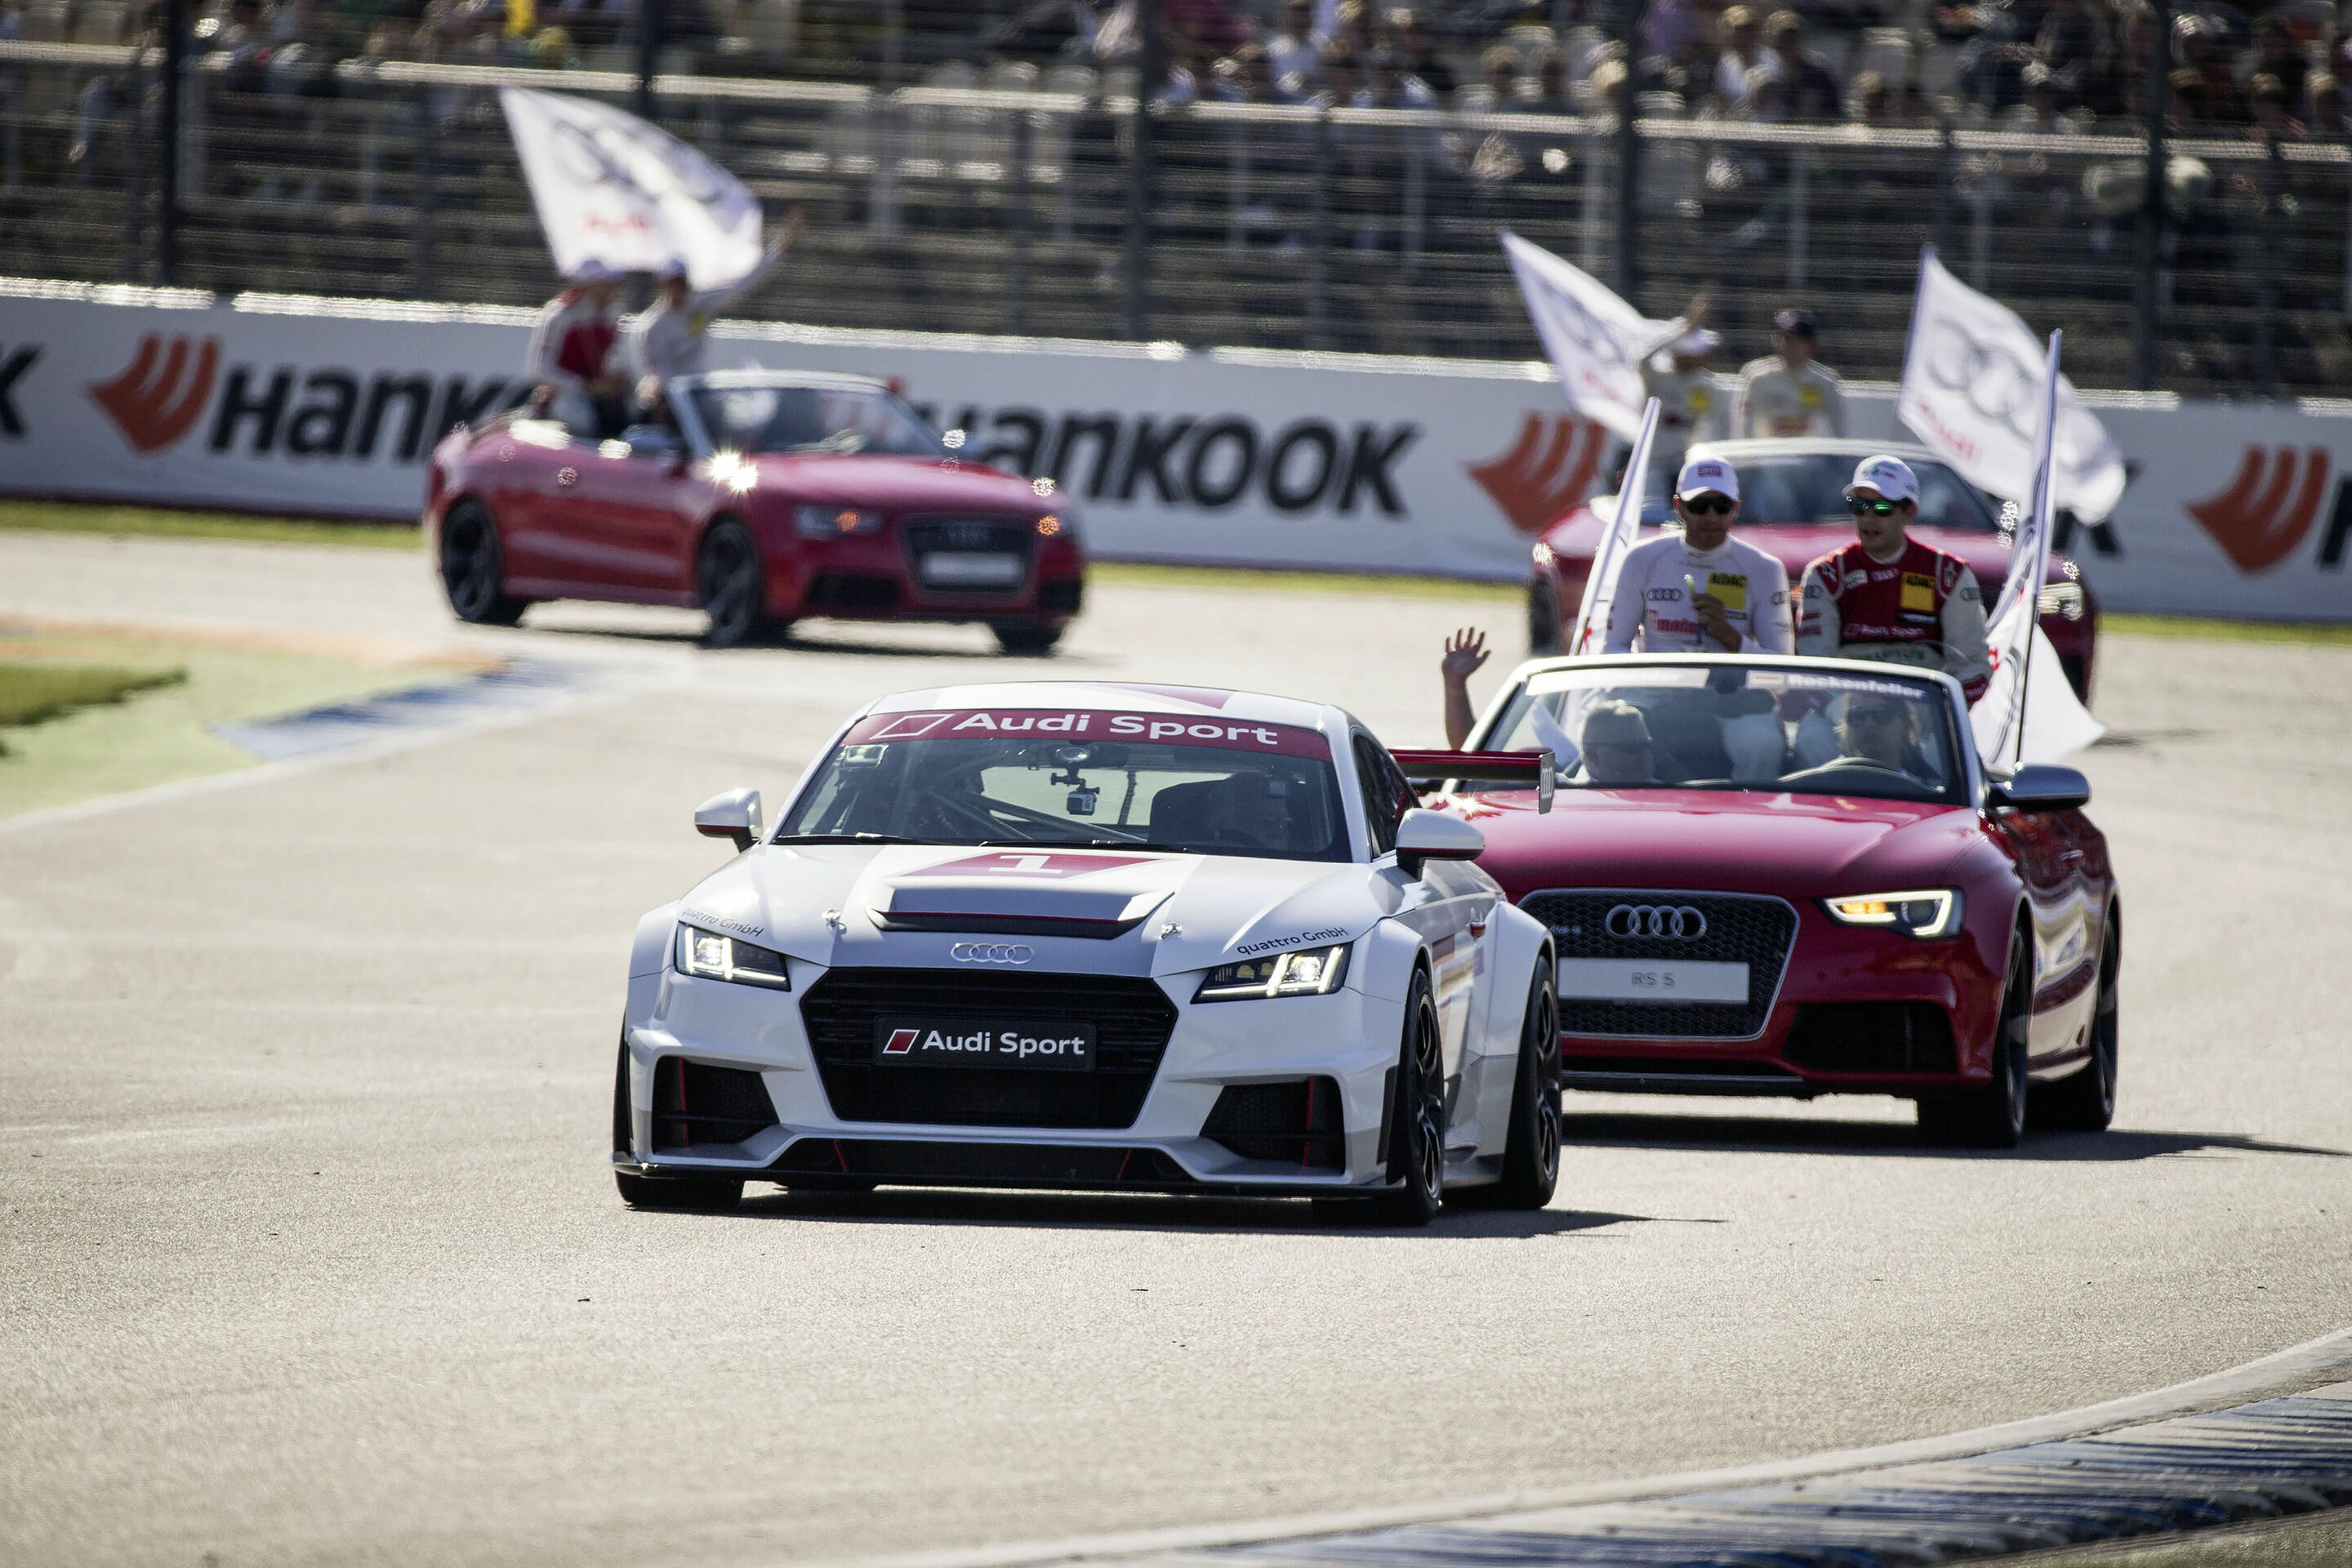 Spoiled for choice in the Audi Sport TT Cup